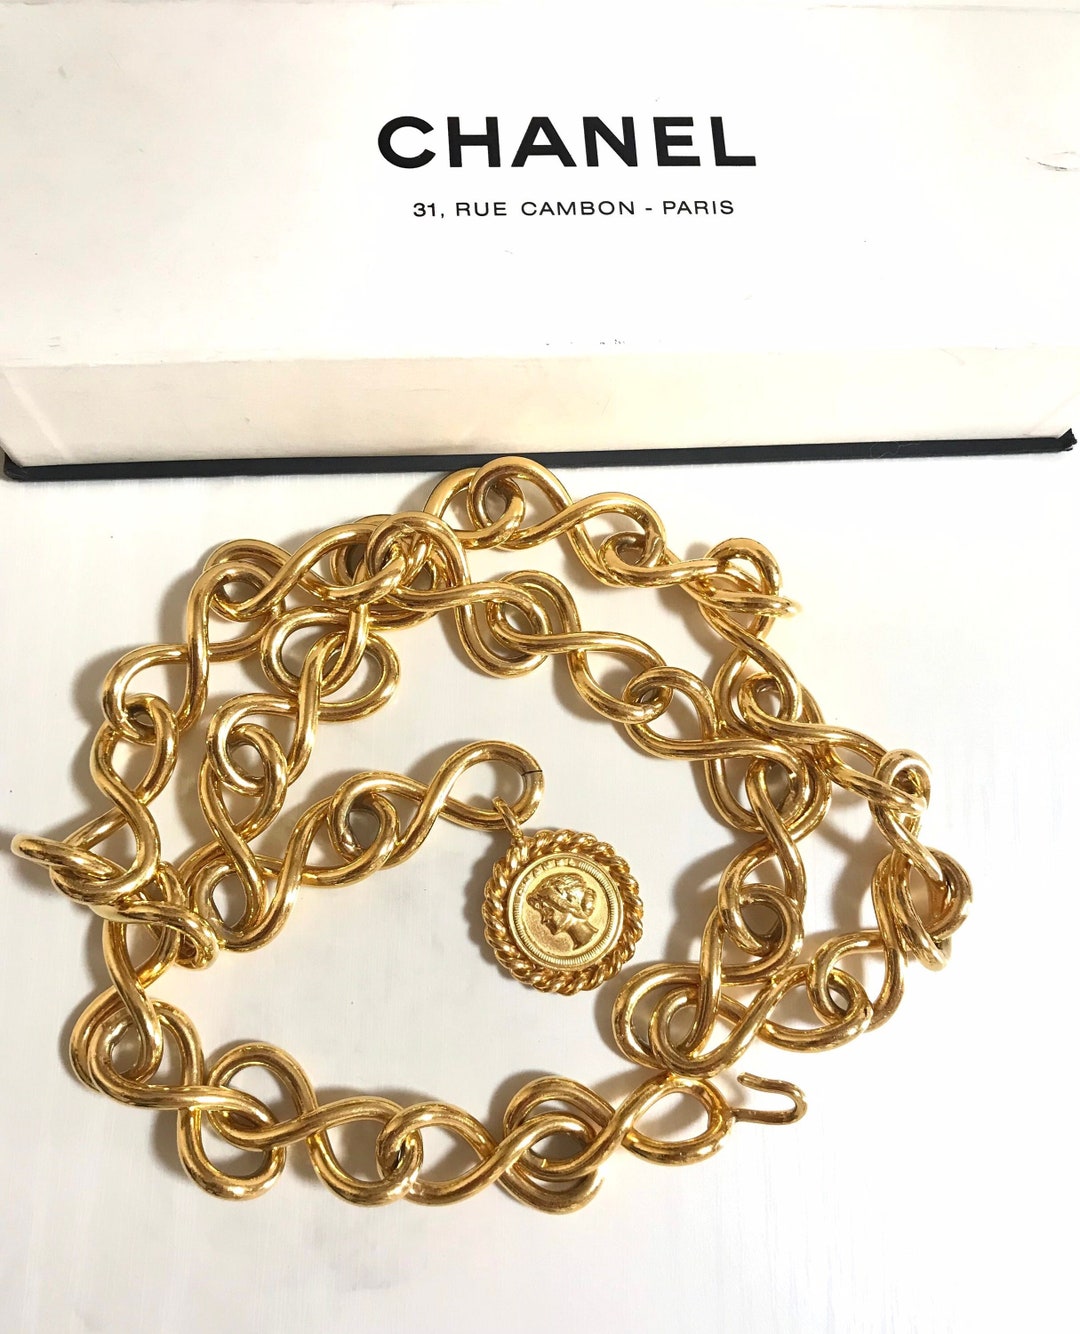 MINT. Vintage CHANEL Thick Chain Belt With Golden